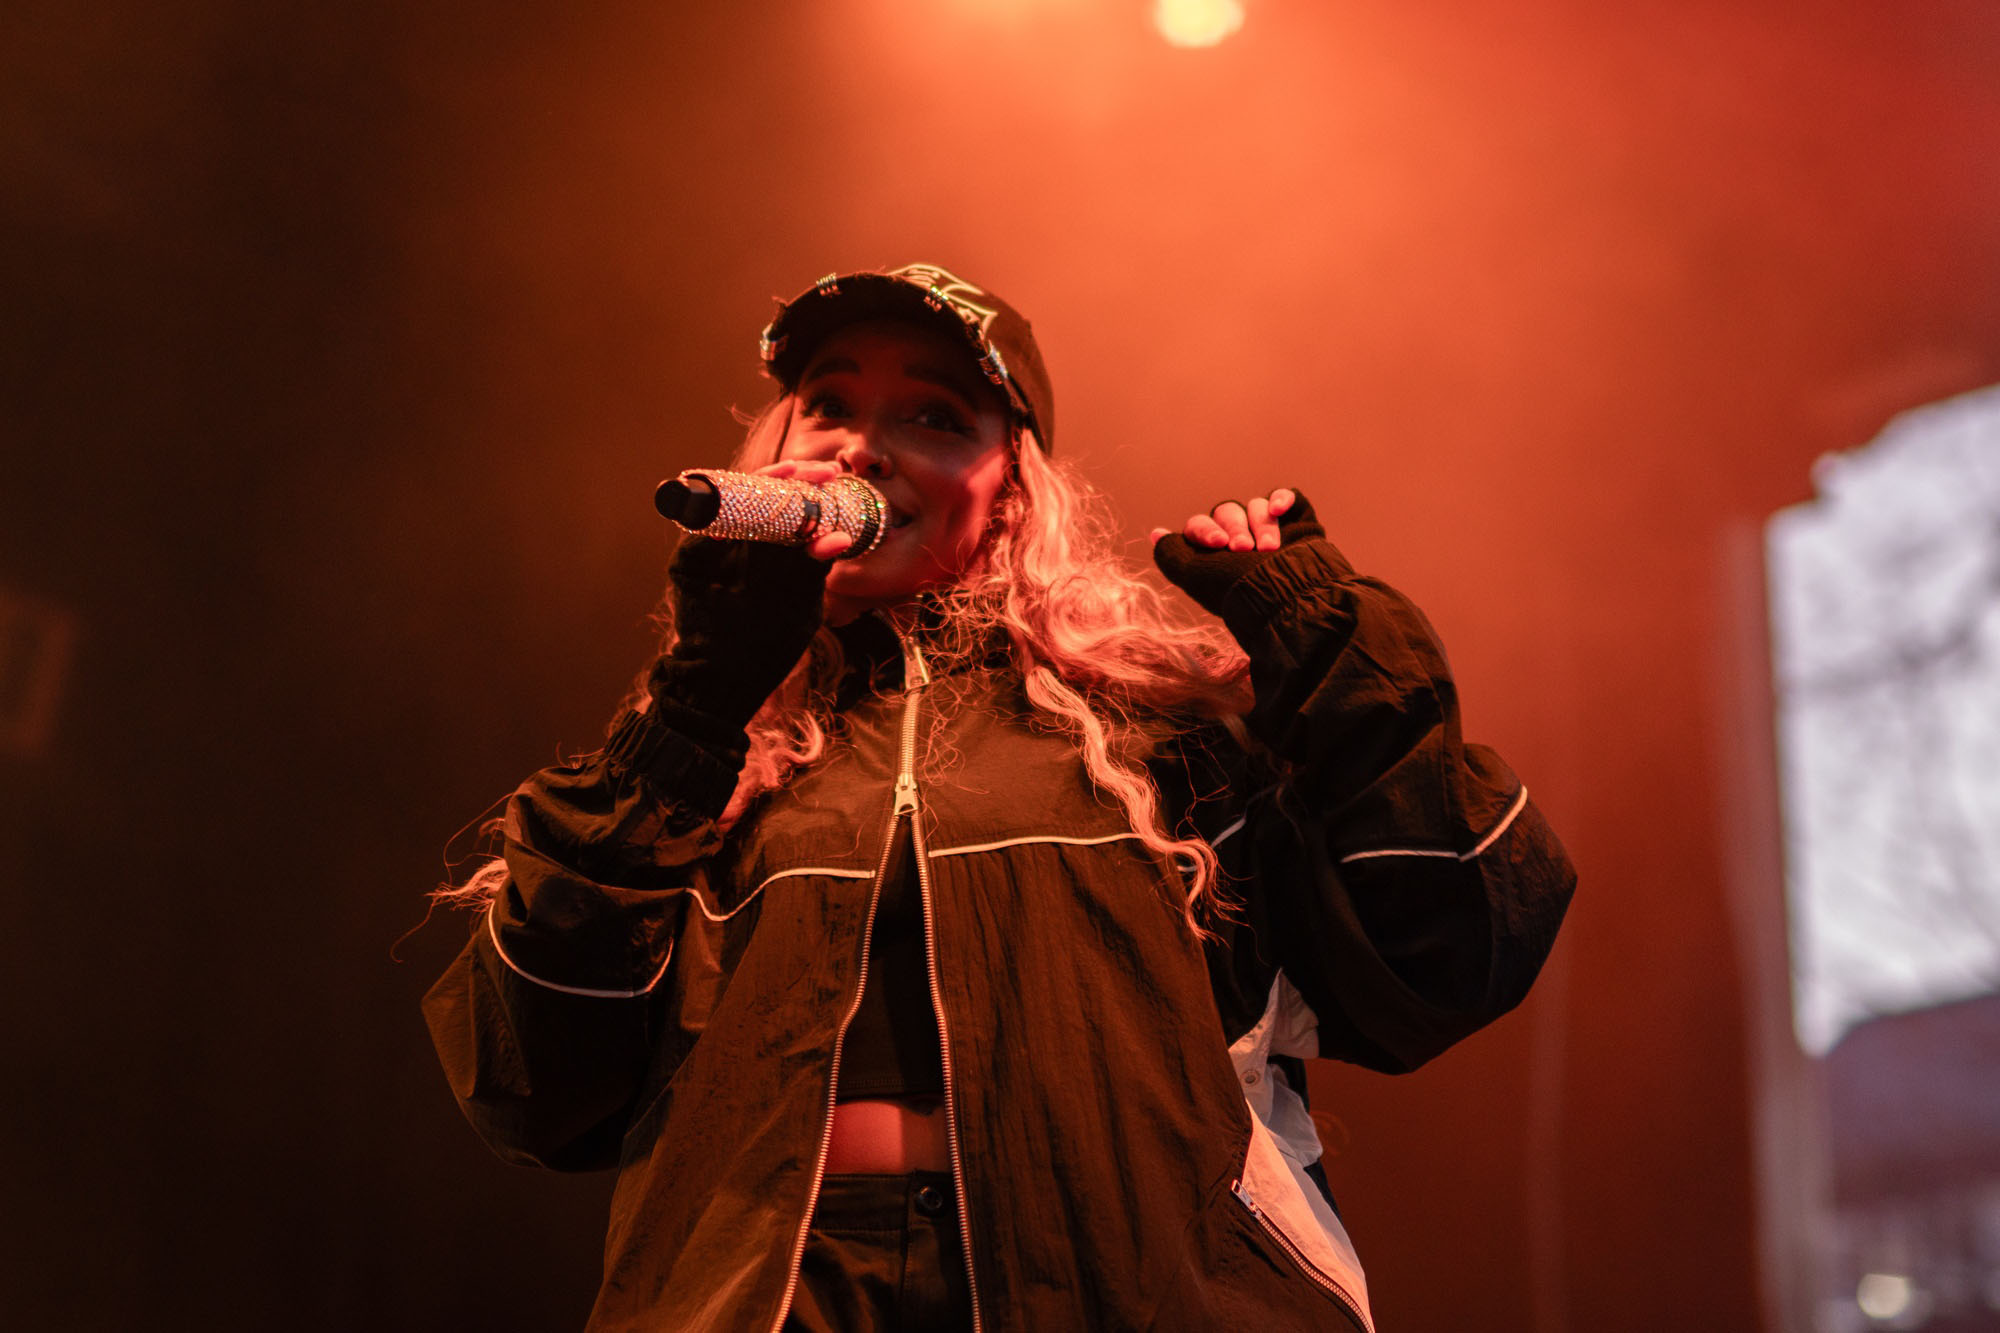 Students braved the cold and gathered in Tercentenary Theatre for Yardfest, the College’s annual spring concert. R&B star Tinashe headlined the night, performing her 2014 hit song “2 On.”